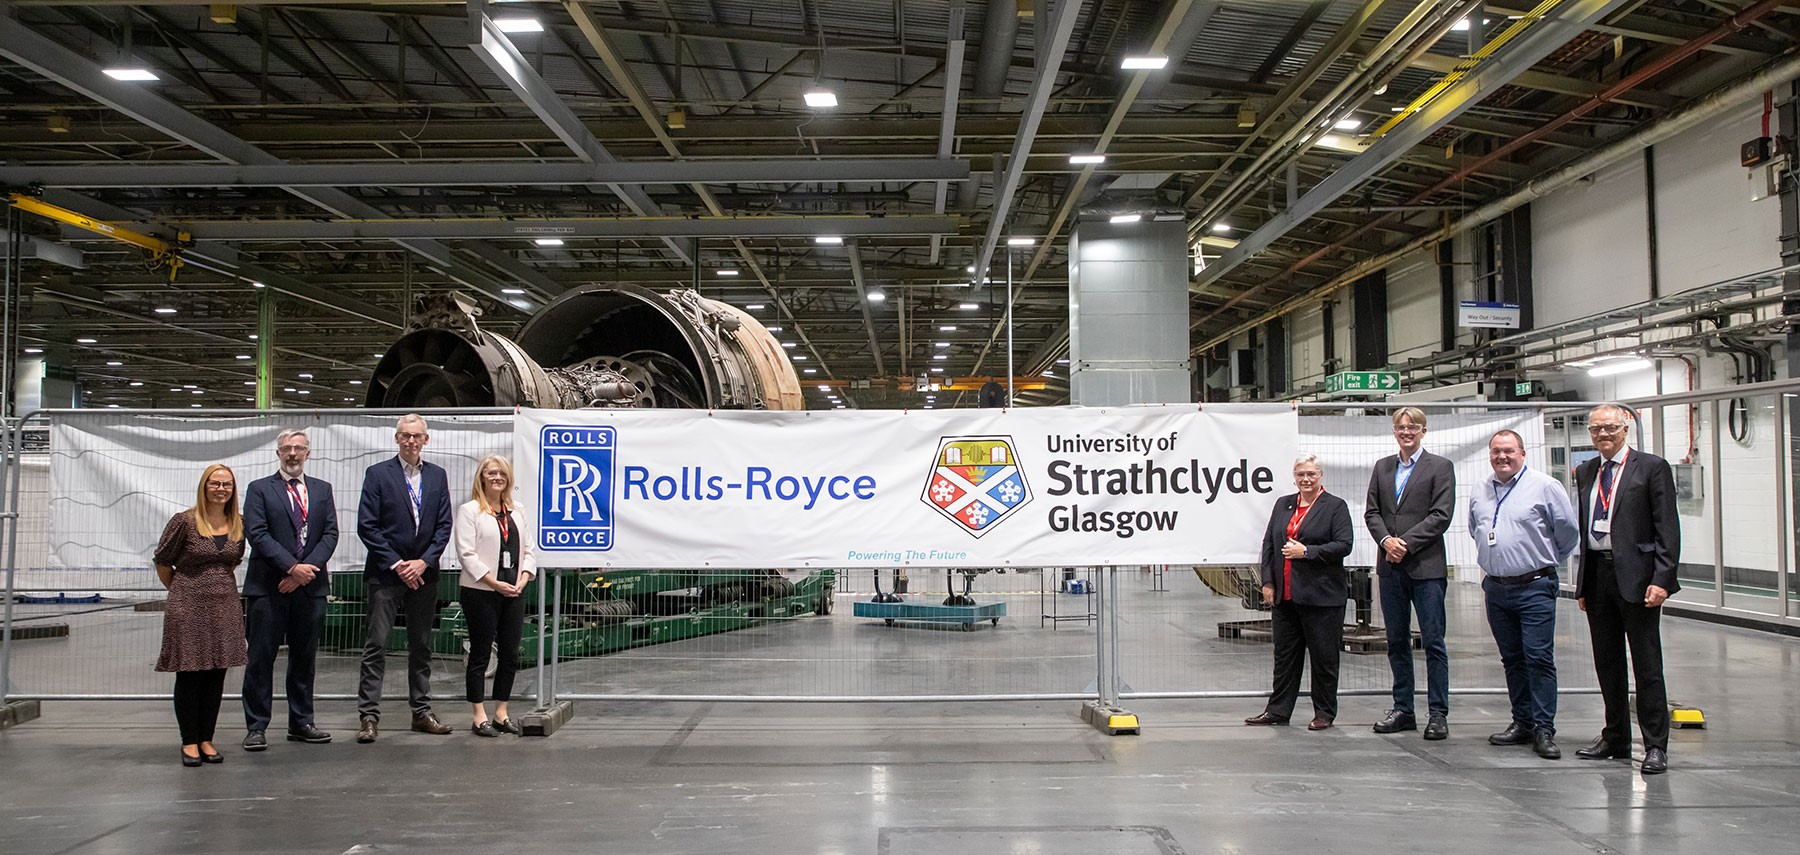 Rolls-Royce and Strathclyde staff standing together. Left to right: Lindsay Gardner – Senior Business Partner, Rolls-Royce; Matthew Maynard, University of Strathclyde; Nigel Bird - Executive Vice President, Rolls-Royce; Jacqueline Redmond, Executive Director, PNDC, University of Strathclyde; Gillian Docherty, Chief Commercial Officer, University of Strathclyde; Rob Watson, Head of Civil Aerospace, Rolls-Royce; Gordon Hutcheson, Manufacturing Executive, Rolls-Royce; and Derek Boyd, Project Director, University of Strathclyde.